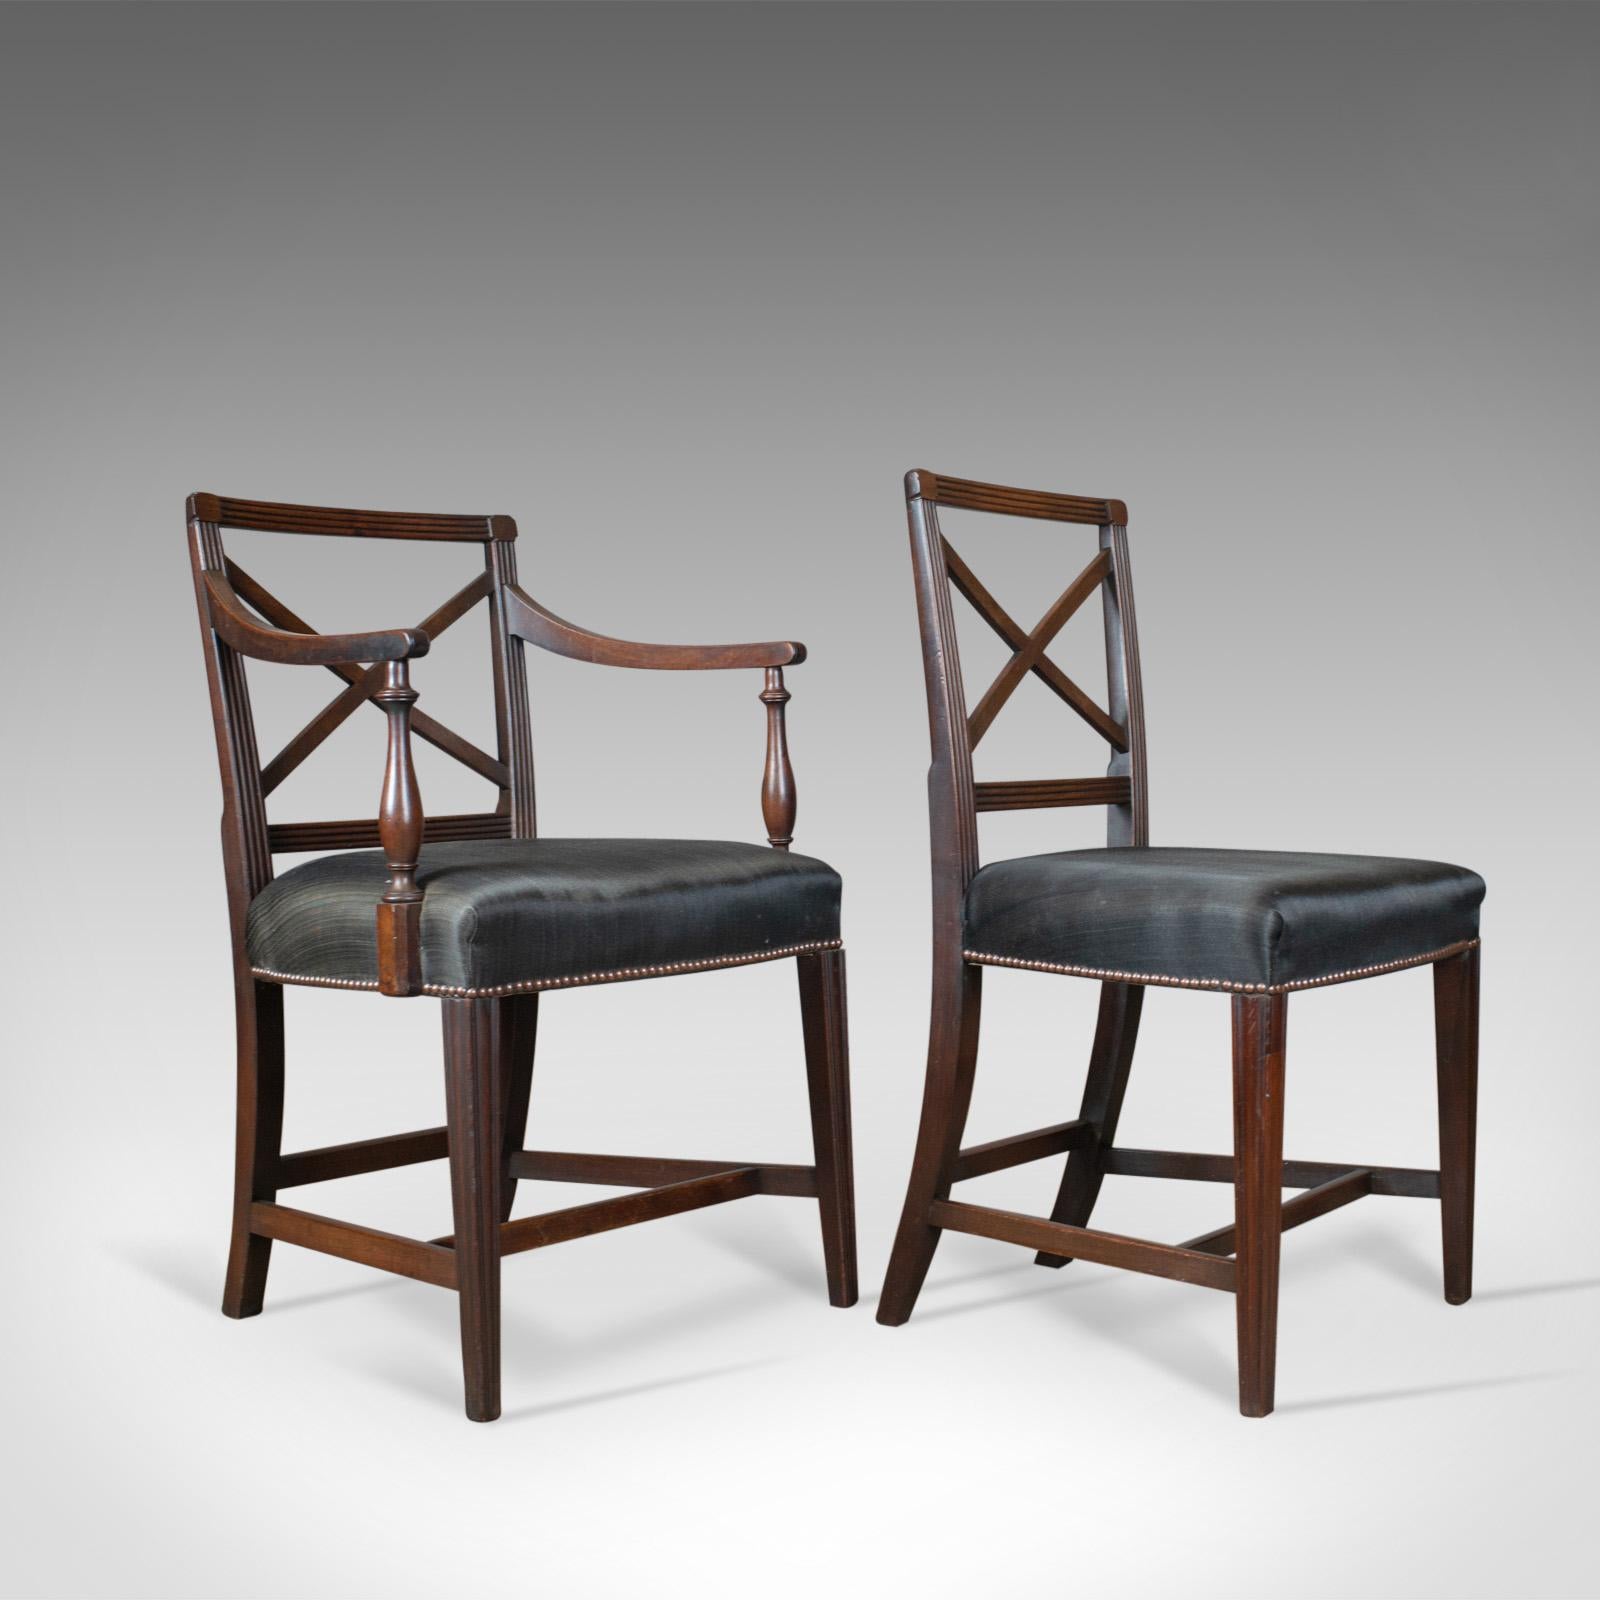 This is a set of nine antique dining chairs; A pair of carvers plus six sides and a spare. English Regency, mahogany chairs dating to the early 19th century, circa 1815. 

A fine set of chairs in select mahogany with a desirable patina
Good